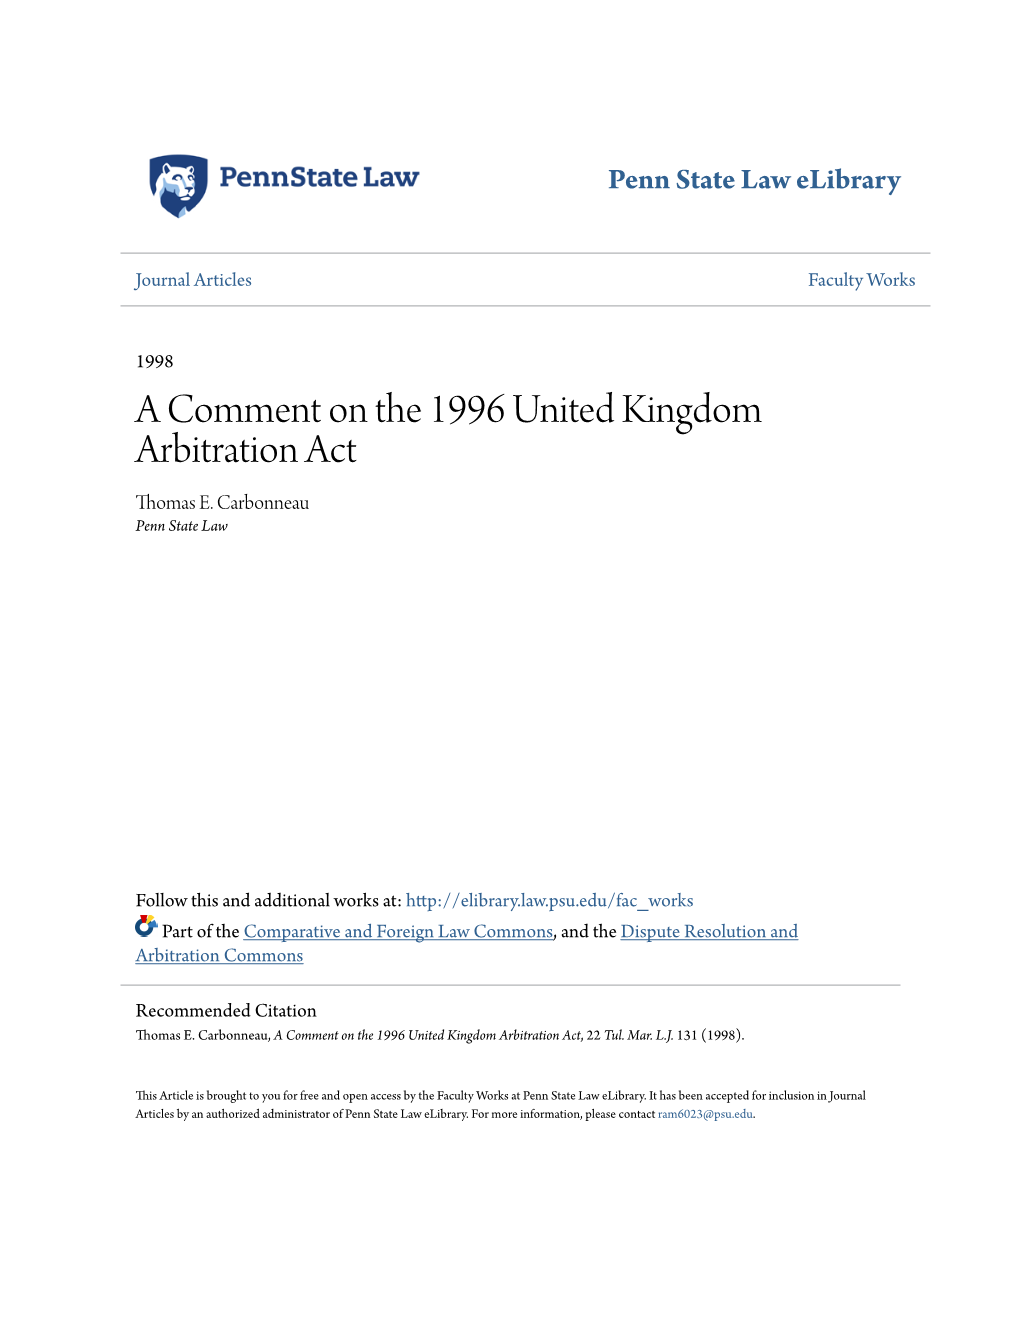 A Comment on the 1996 United Kingdom Arbitration Act Thomas E